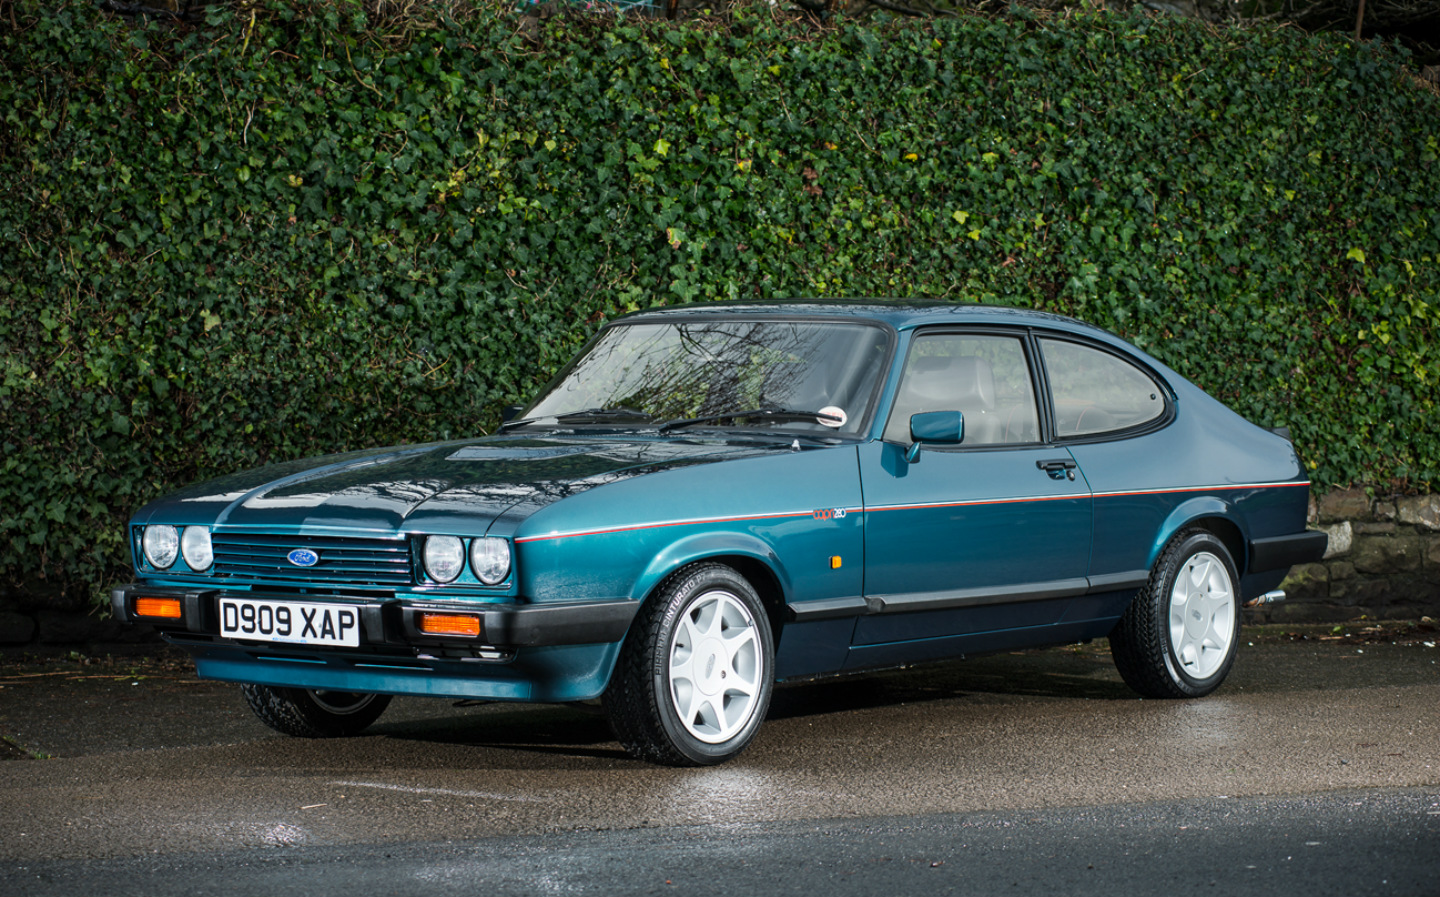 Ferrari? No thanks; I’ll take the Ford Capri and laugh all the way to the bank